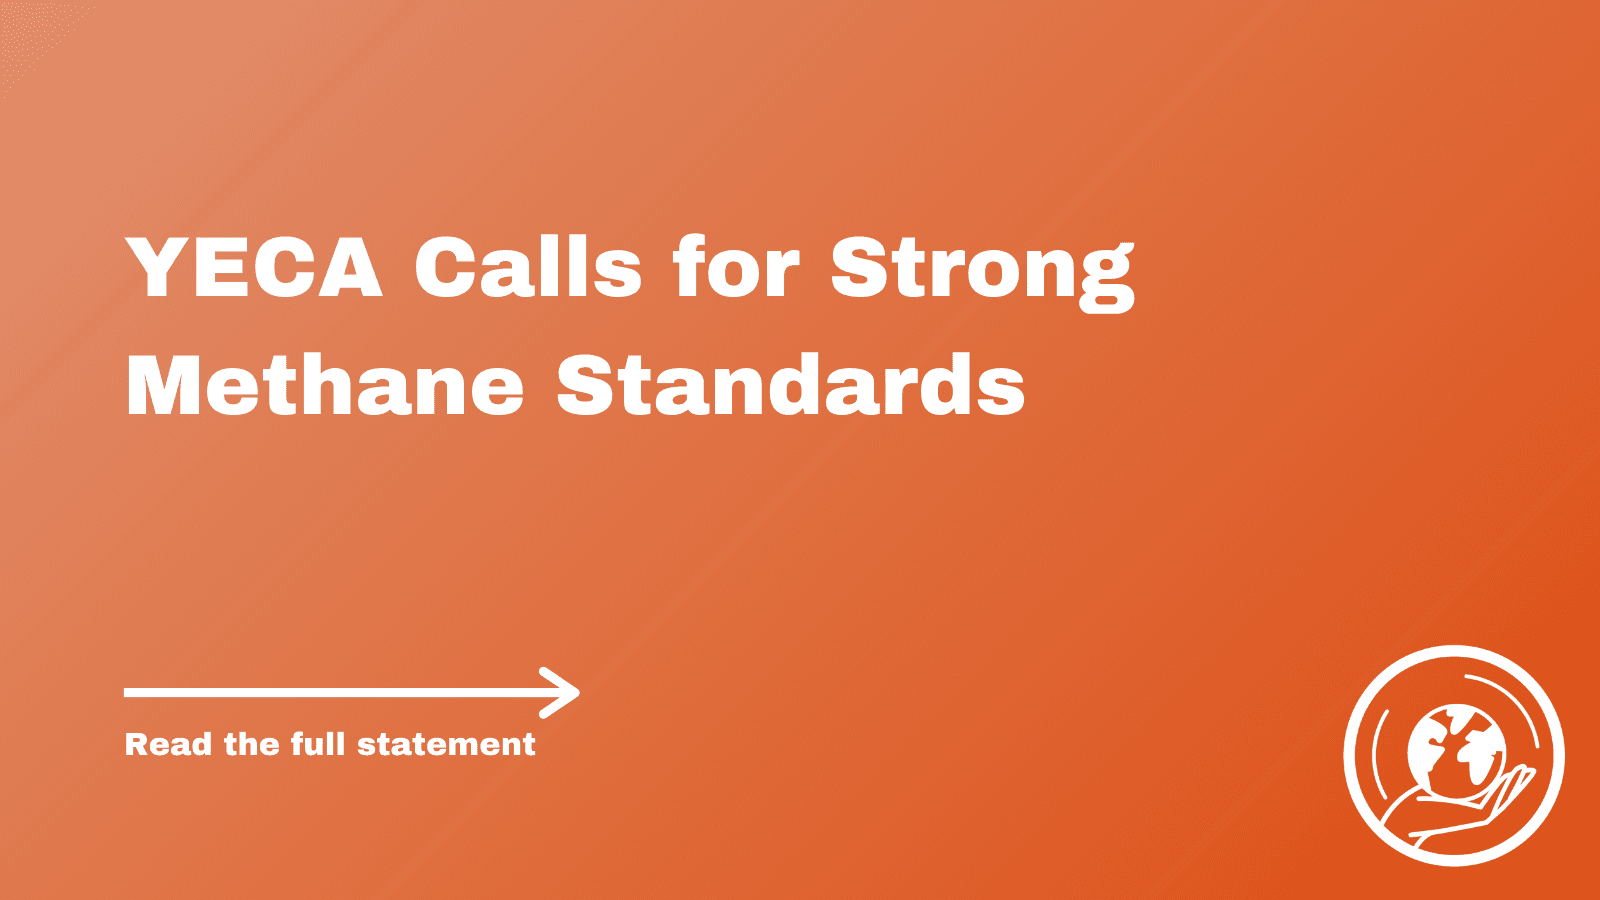 YECA Calls for Strong Methane Standards